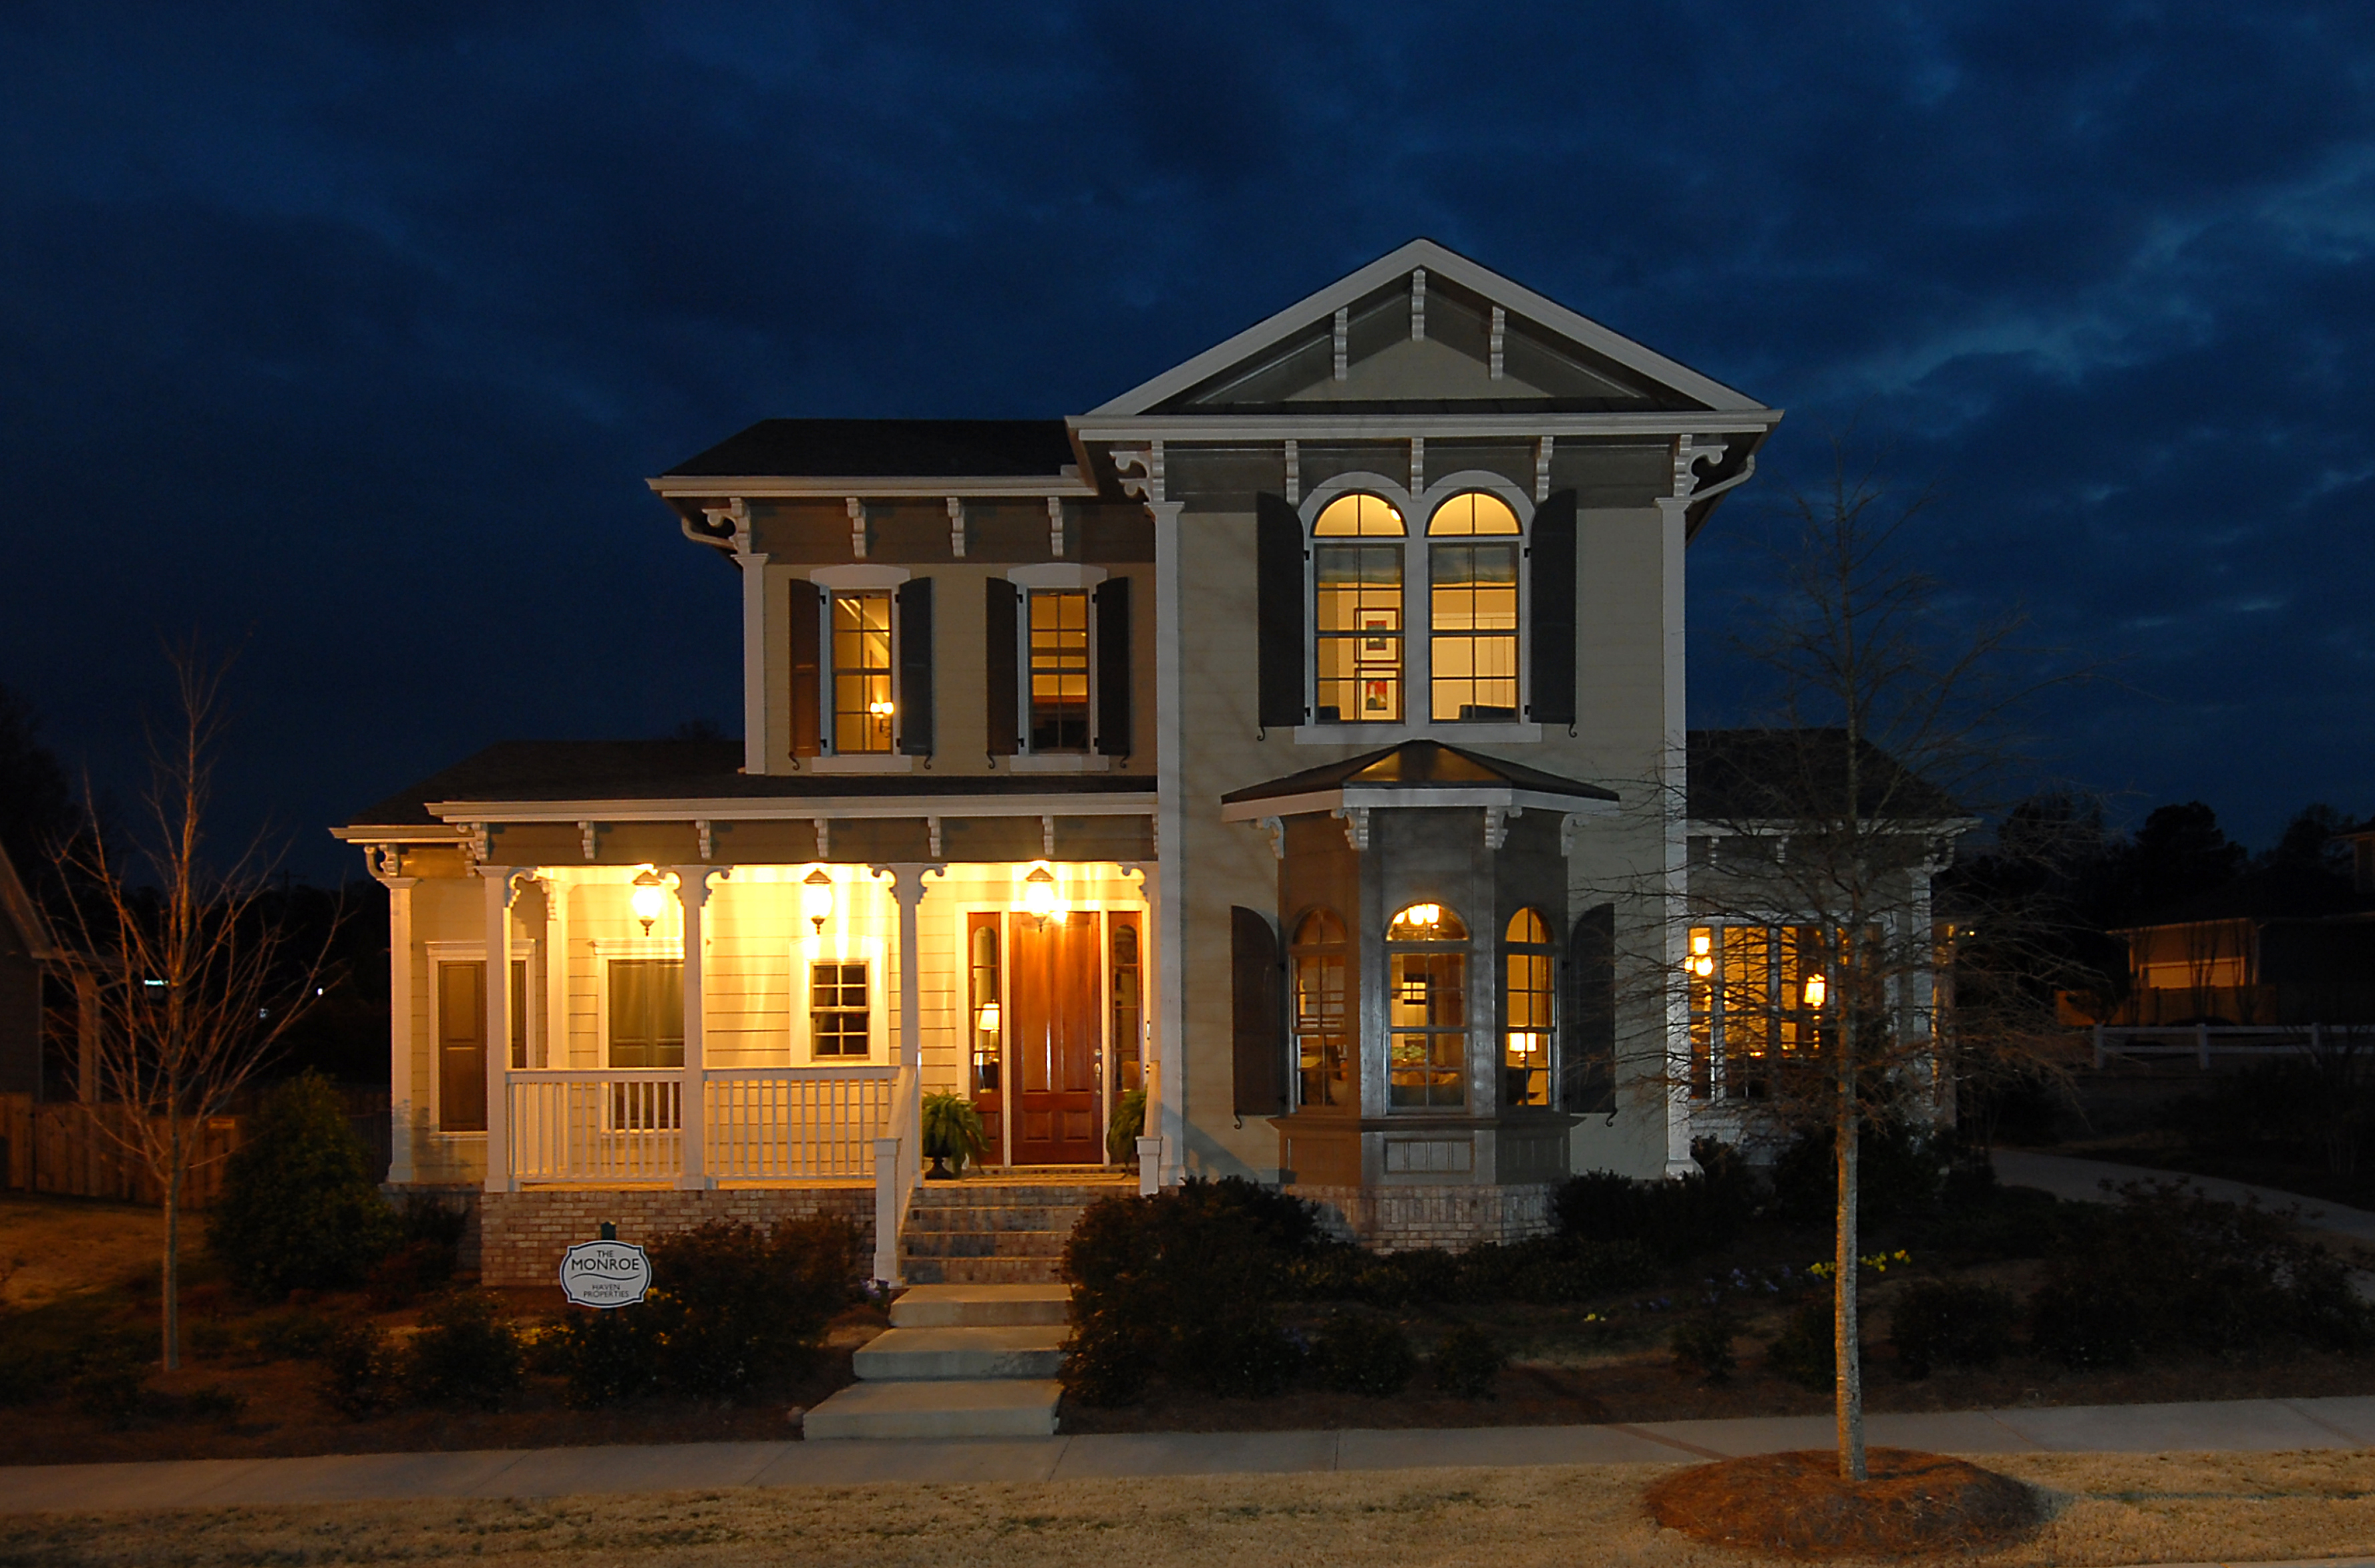 exterior_front_view_image-night